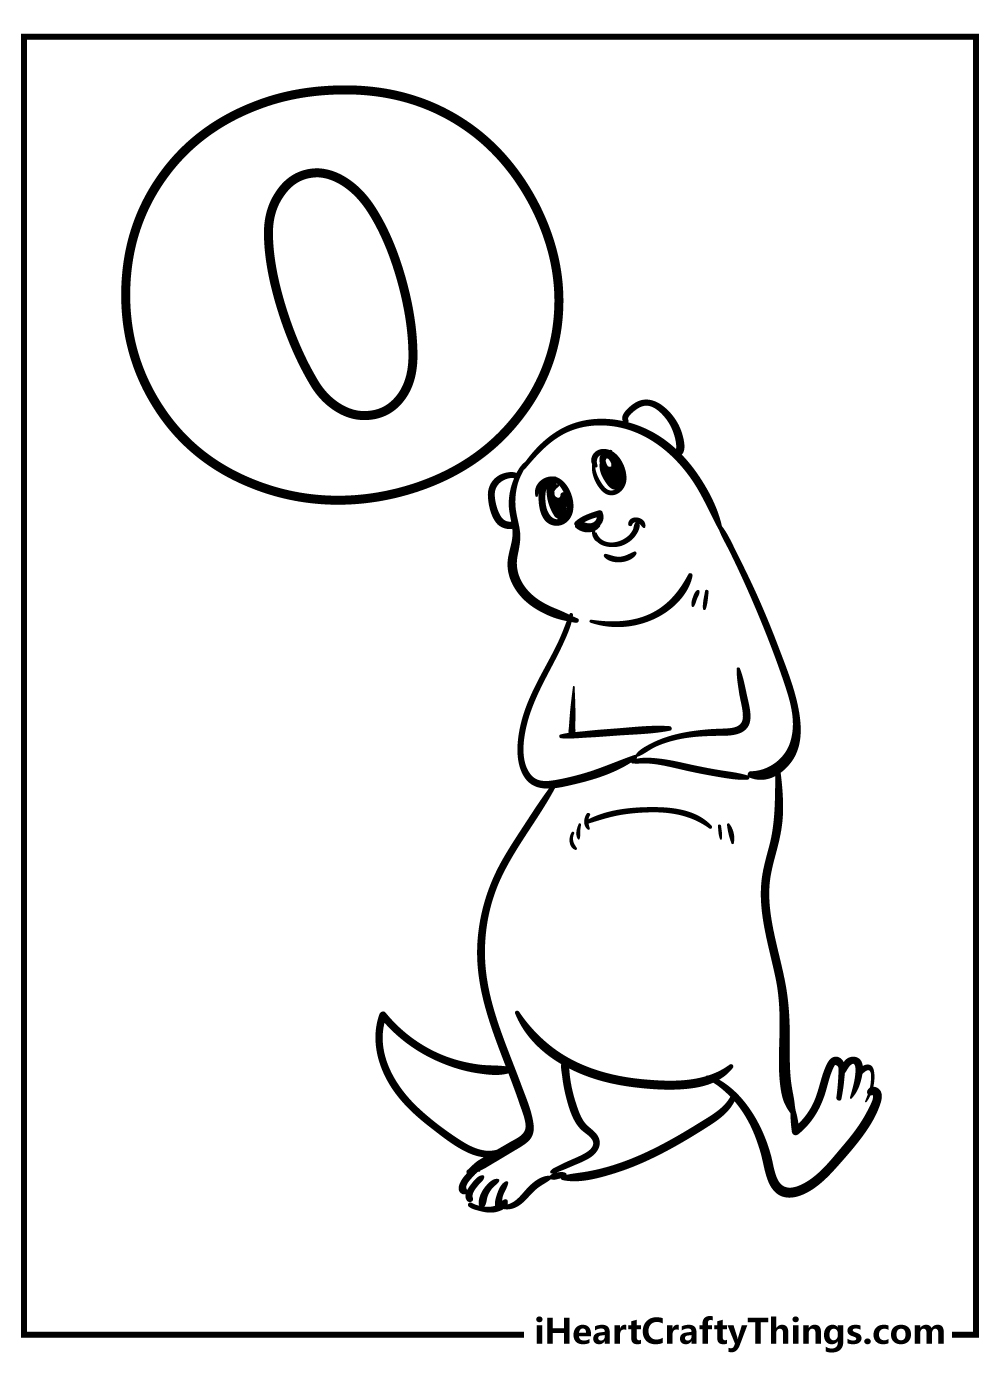 Letter O Coloring Pages for adults free printable